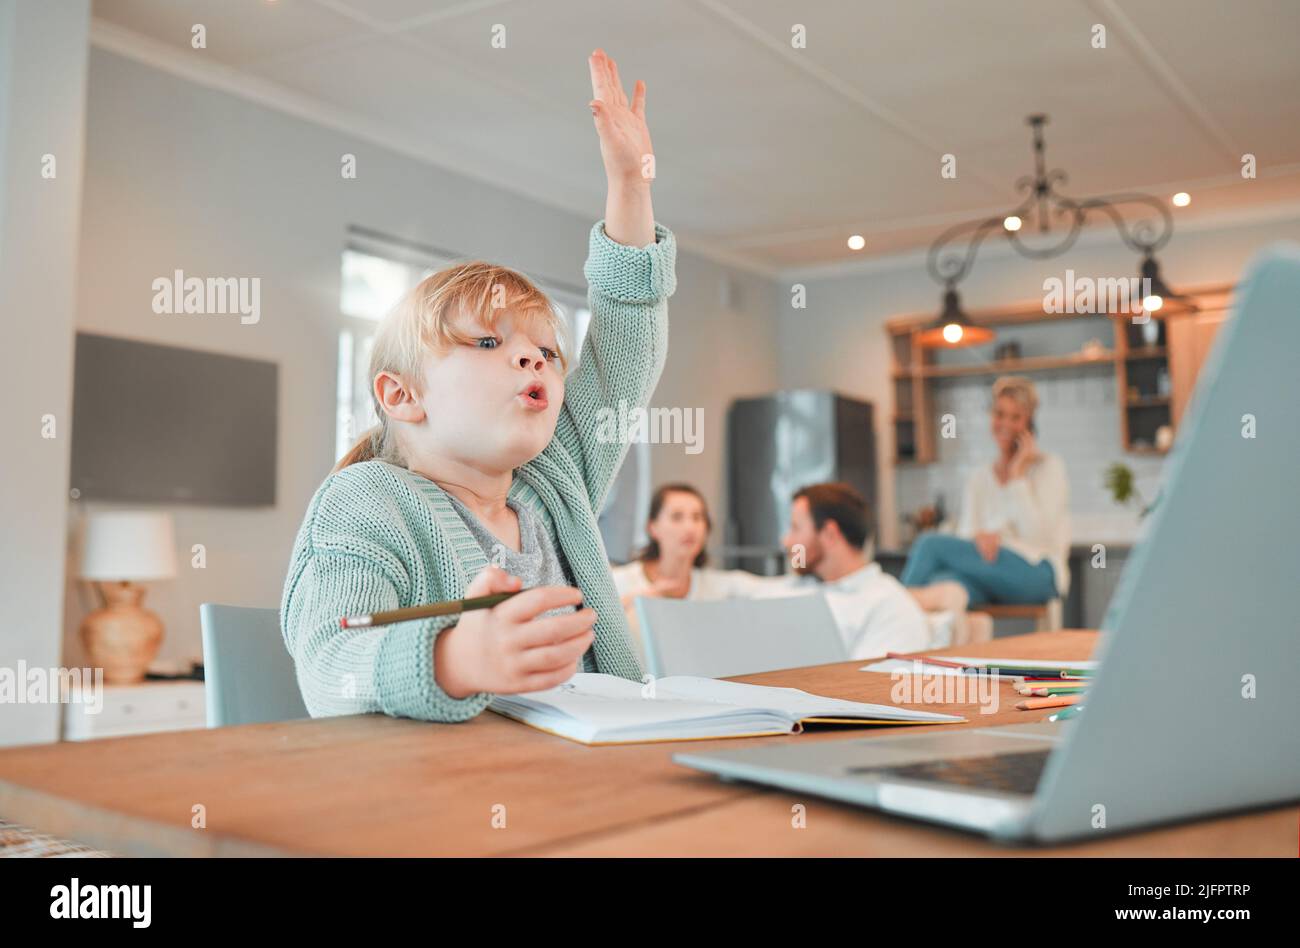 Home schooling girl with her hand in the air. Cute caucasian child using a laptop to attend classes remotely. Asking and answering questions in class Stock Photo